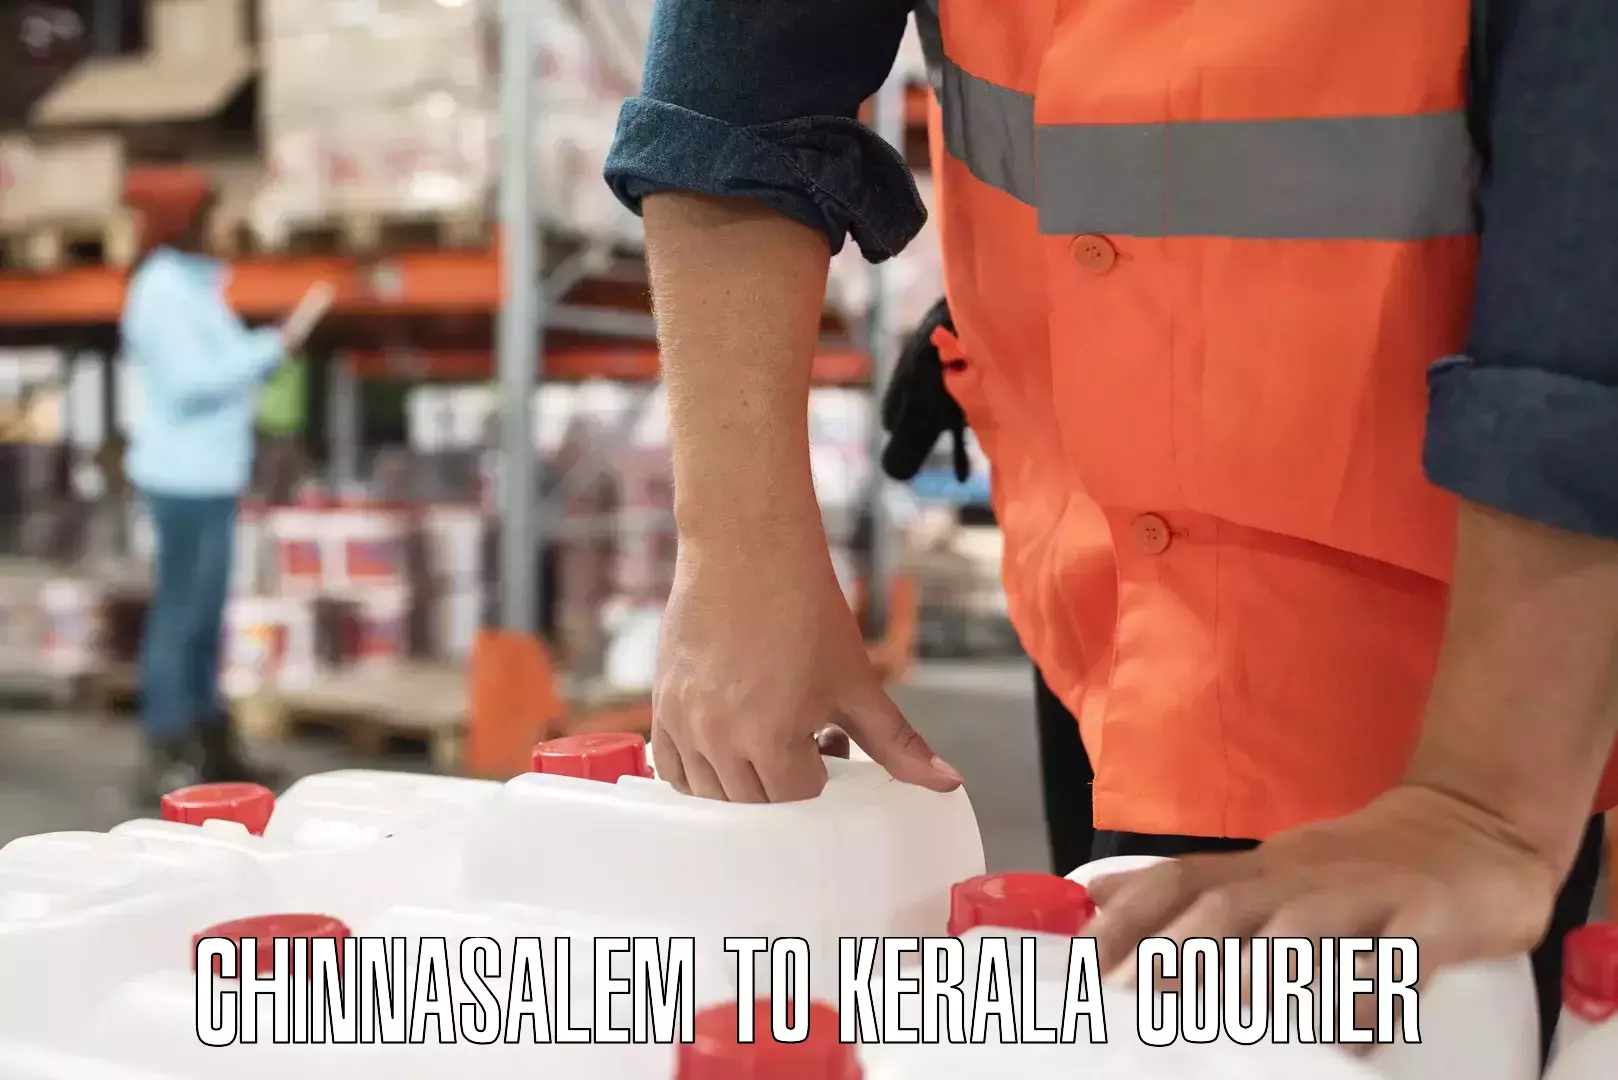 Large-scale shipping solutions Chinnasalem to Kerala